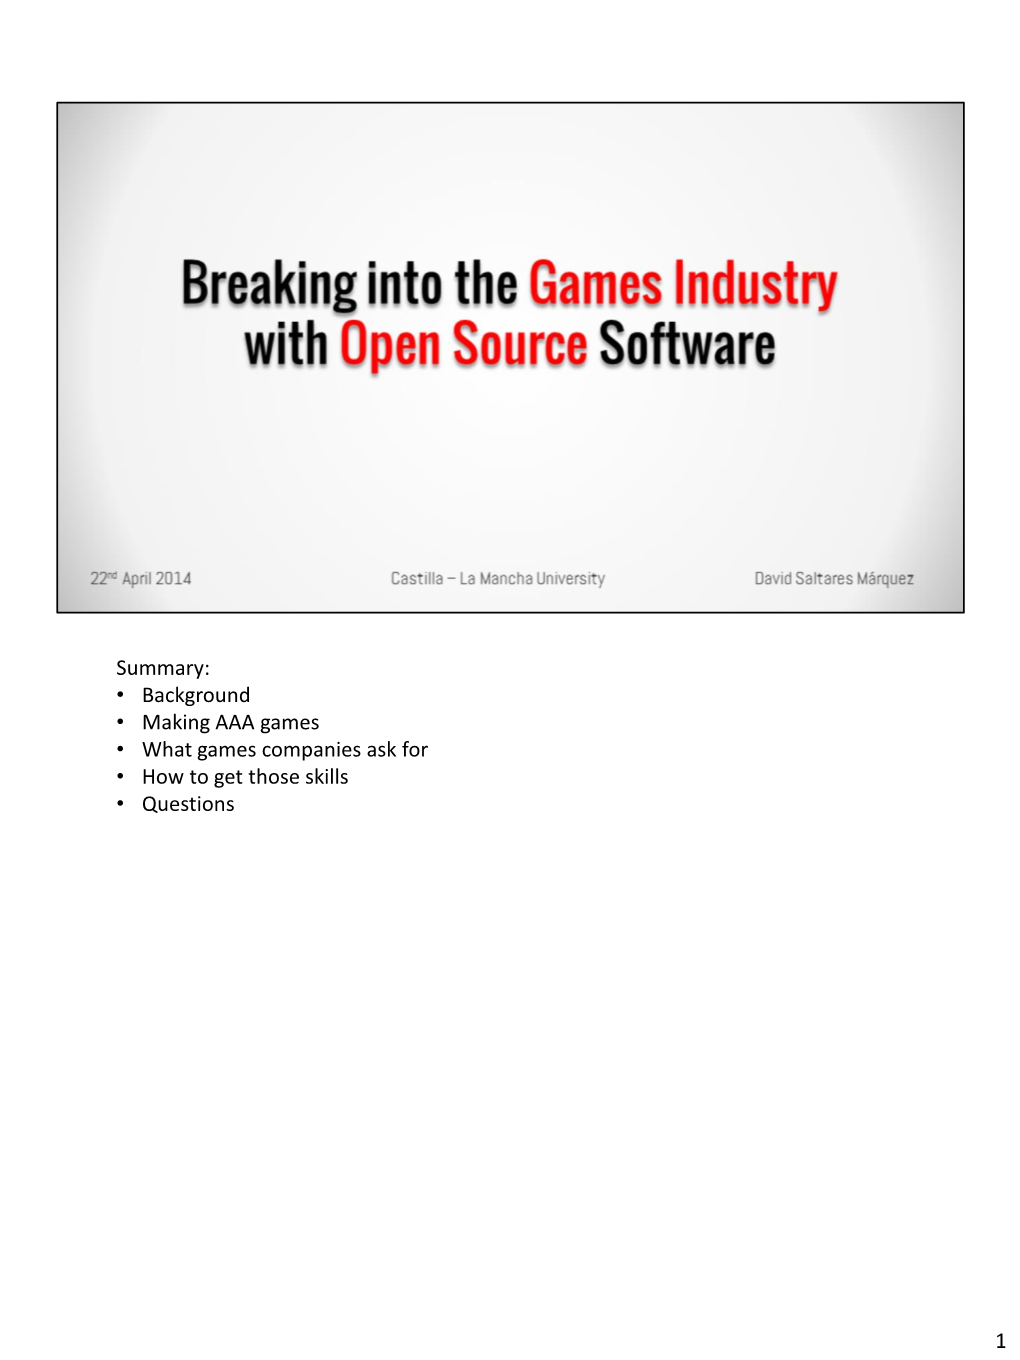 Background • Making AAA Games • What Games Companies Ask for • How to Get Those Skills • Questions